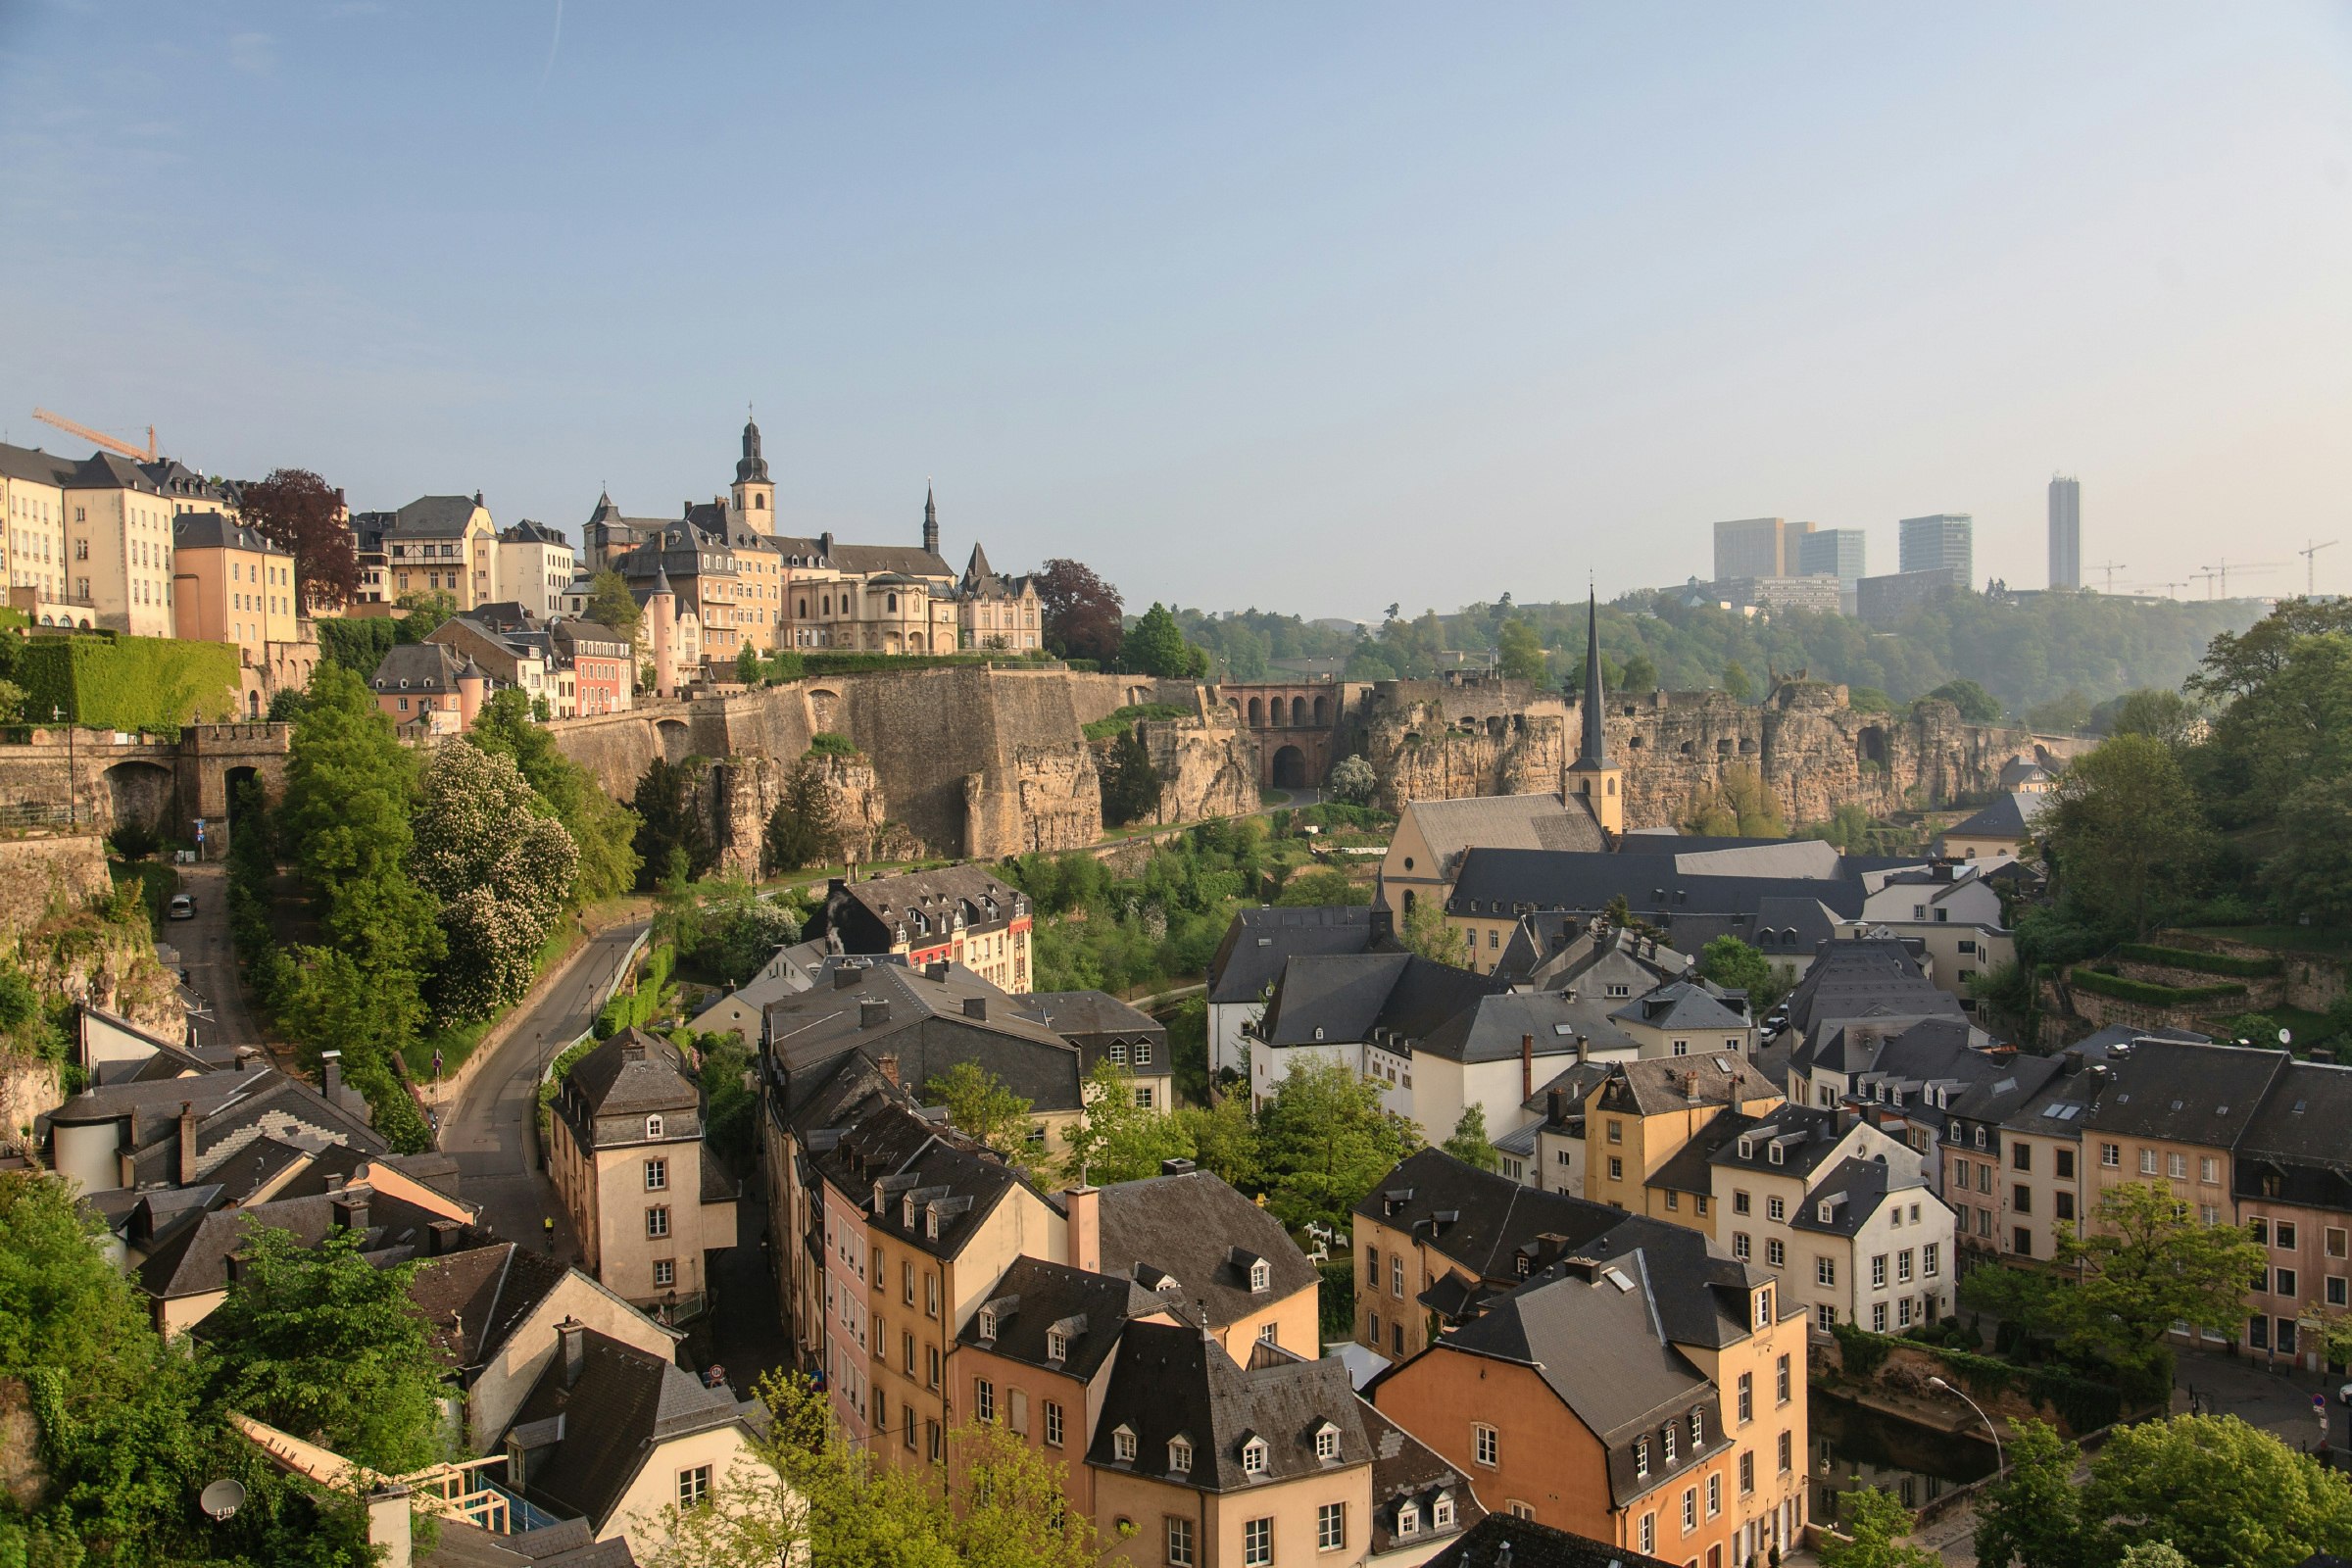 Luxembourg was named as the most LGBT-friendly country in the world for workers.